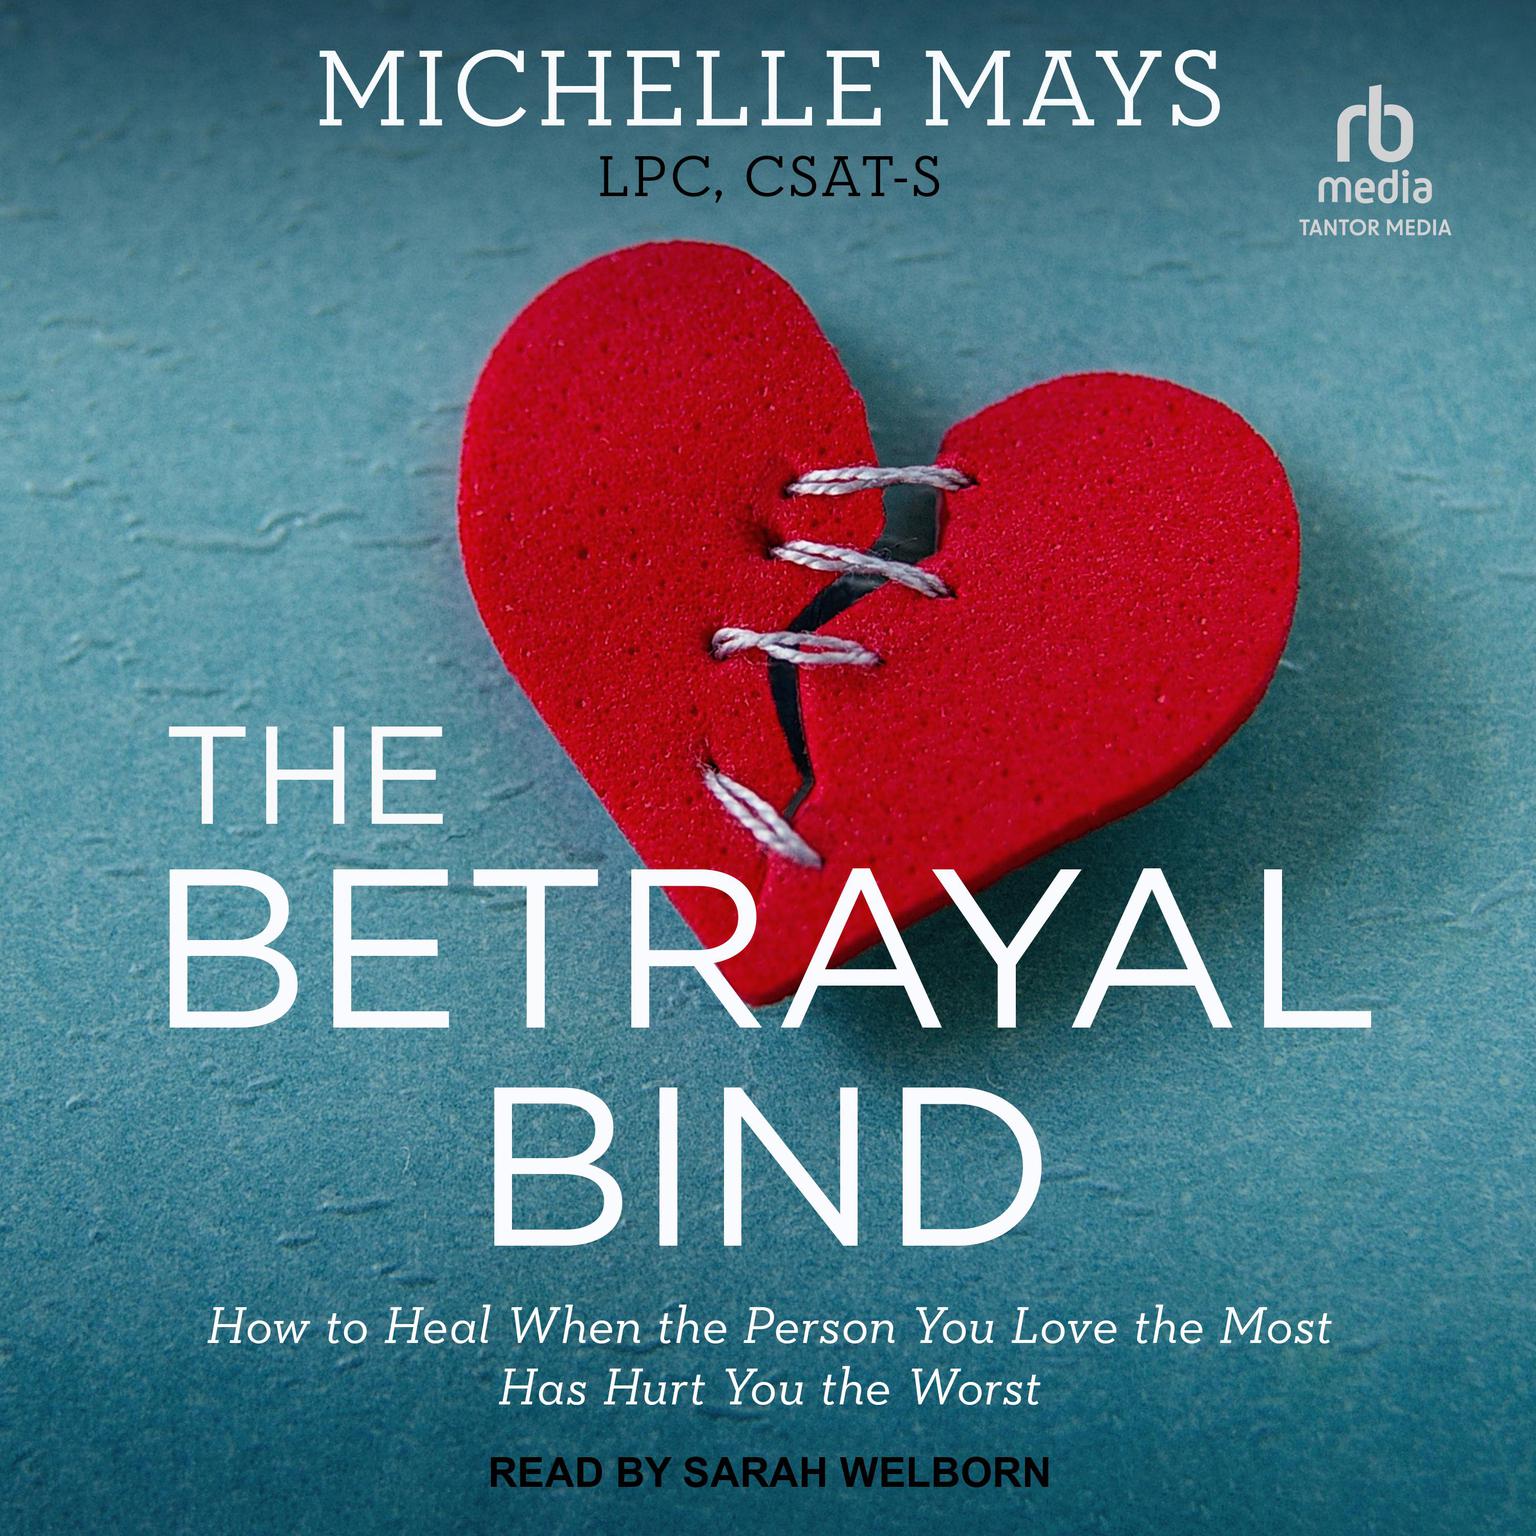 The Betrayal Bind: How to Heal When the Person You Love the Most Has Hurt You the Worst Audiobook, by Michelle Mays LPC, CSAT-S